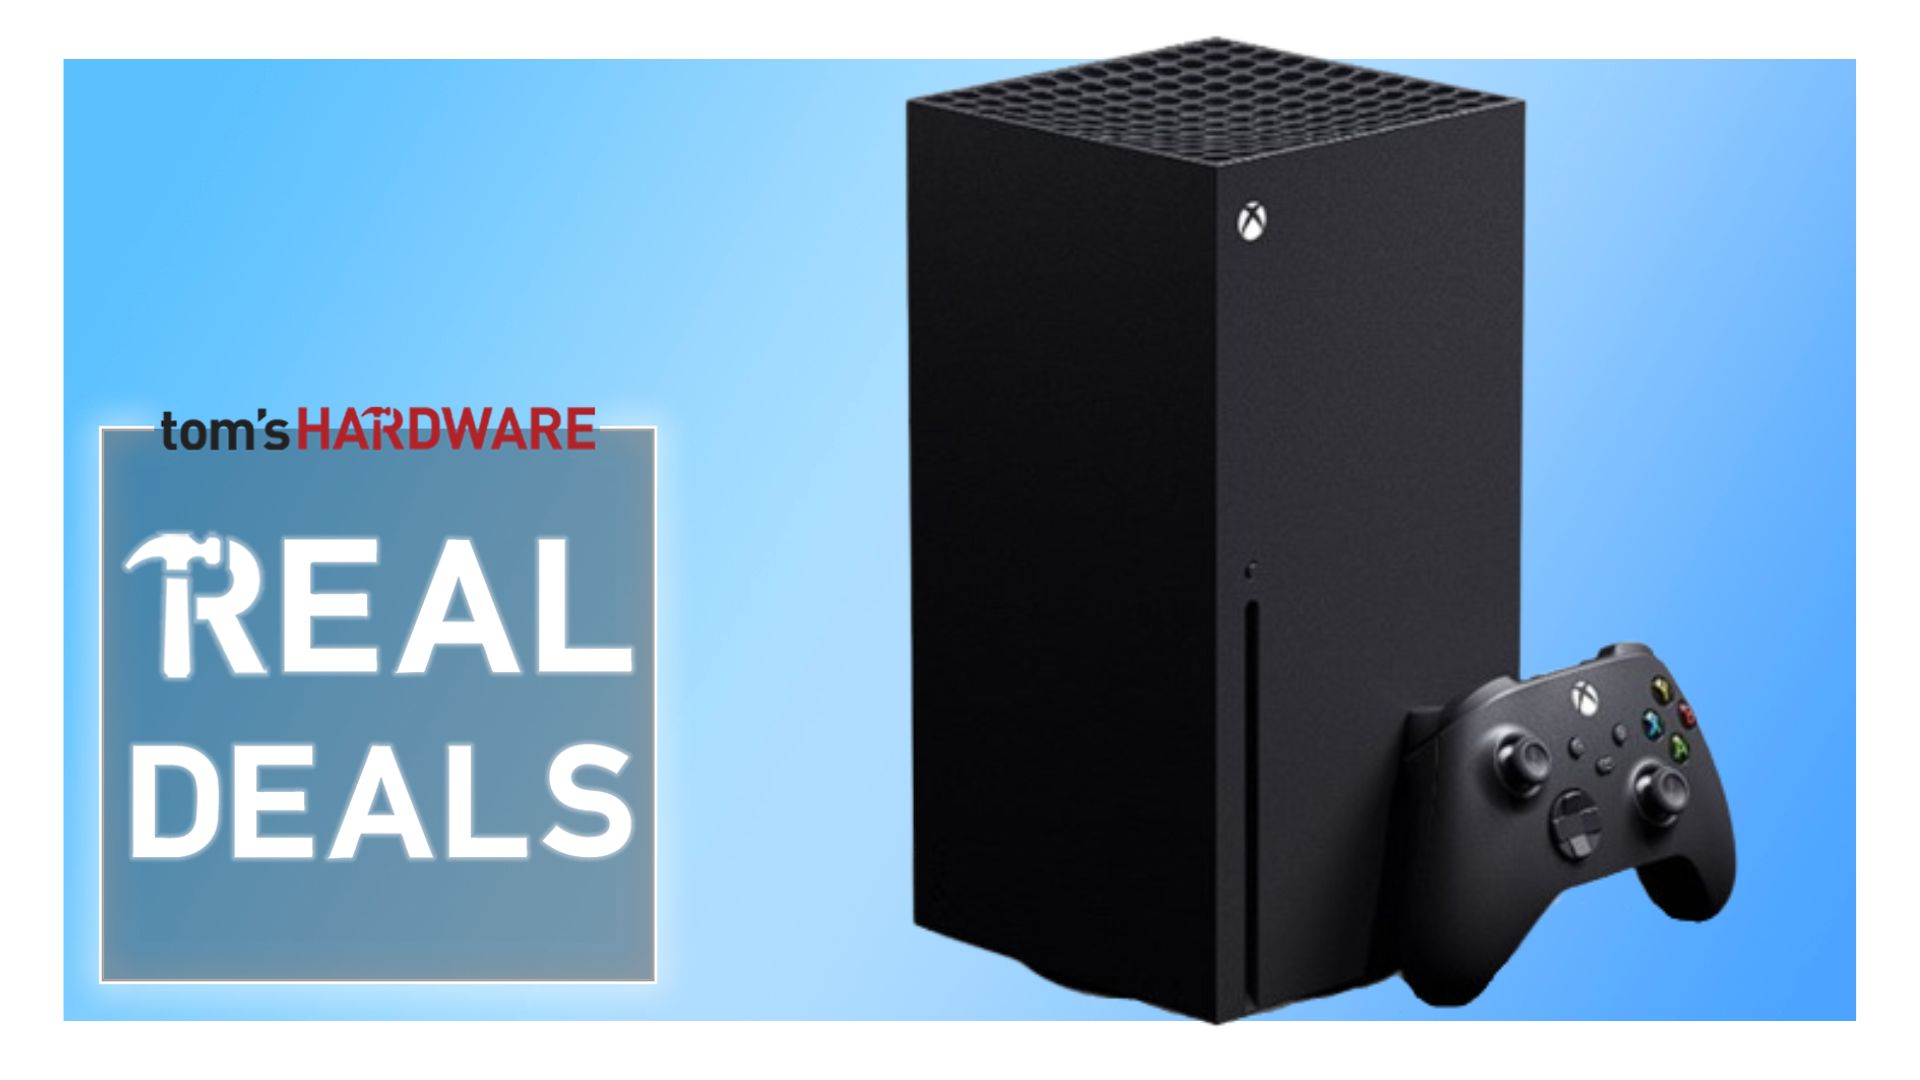 These Xbox Series X and S Black Friday deals are the cheapest I've seen